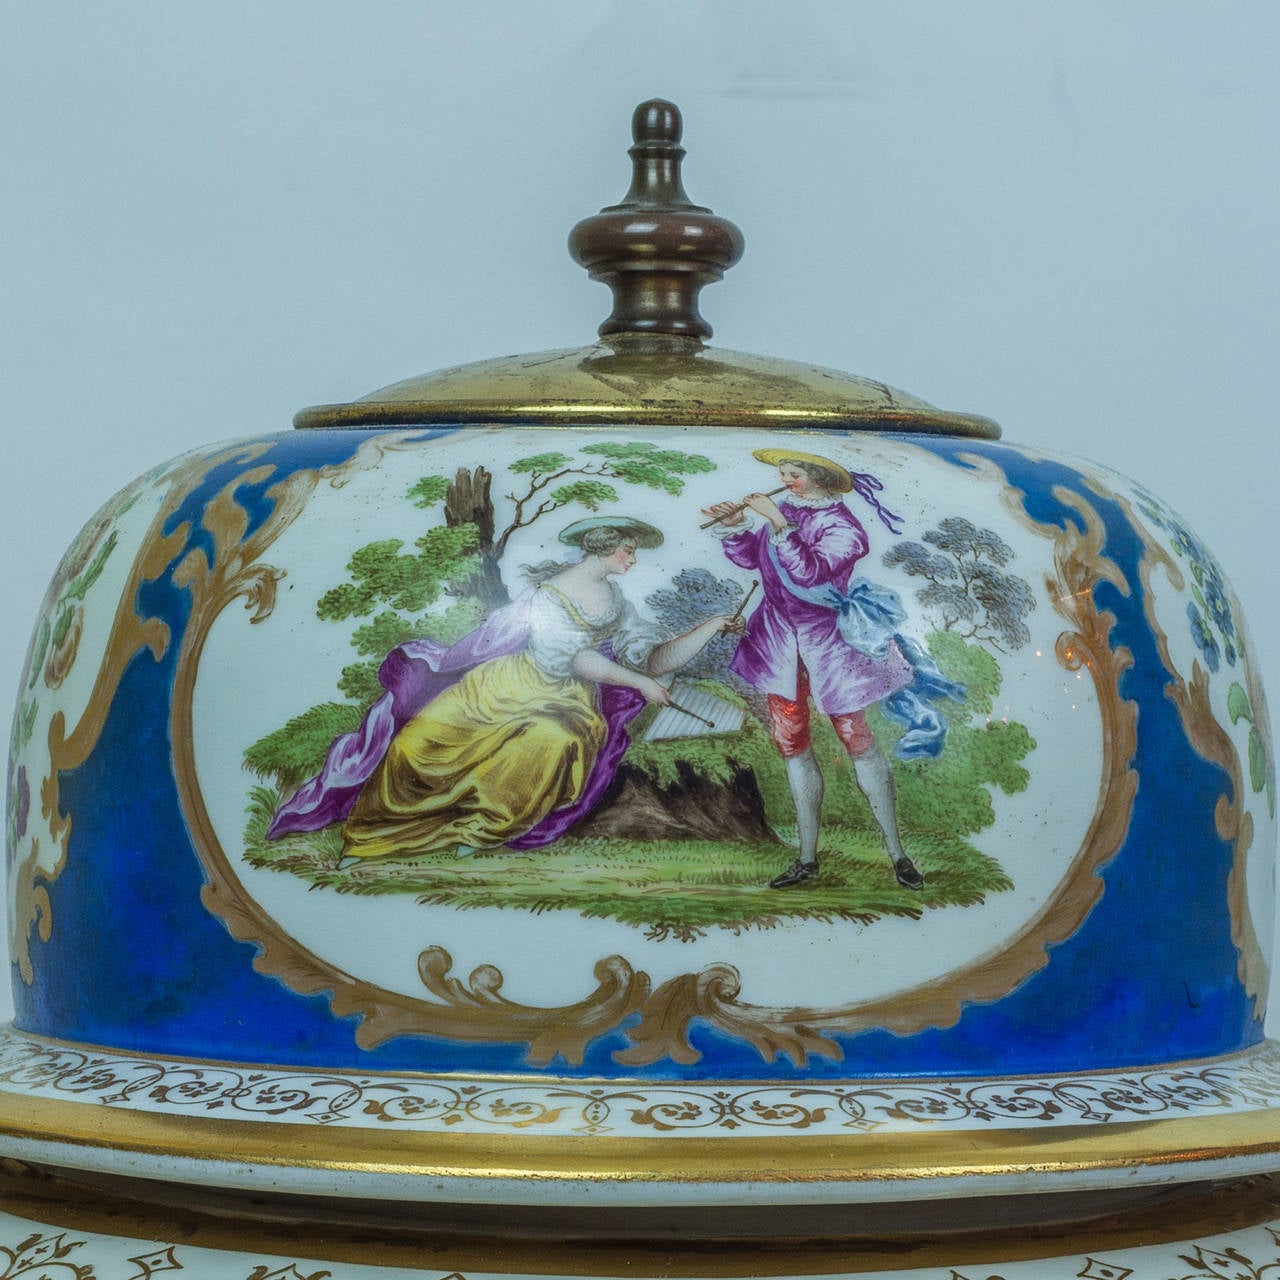 19th Century Pair of Meissen Style Blue Porcelain Covered Jars with Painted Scenes